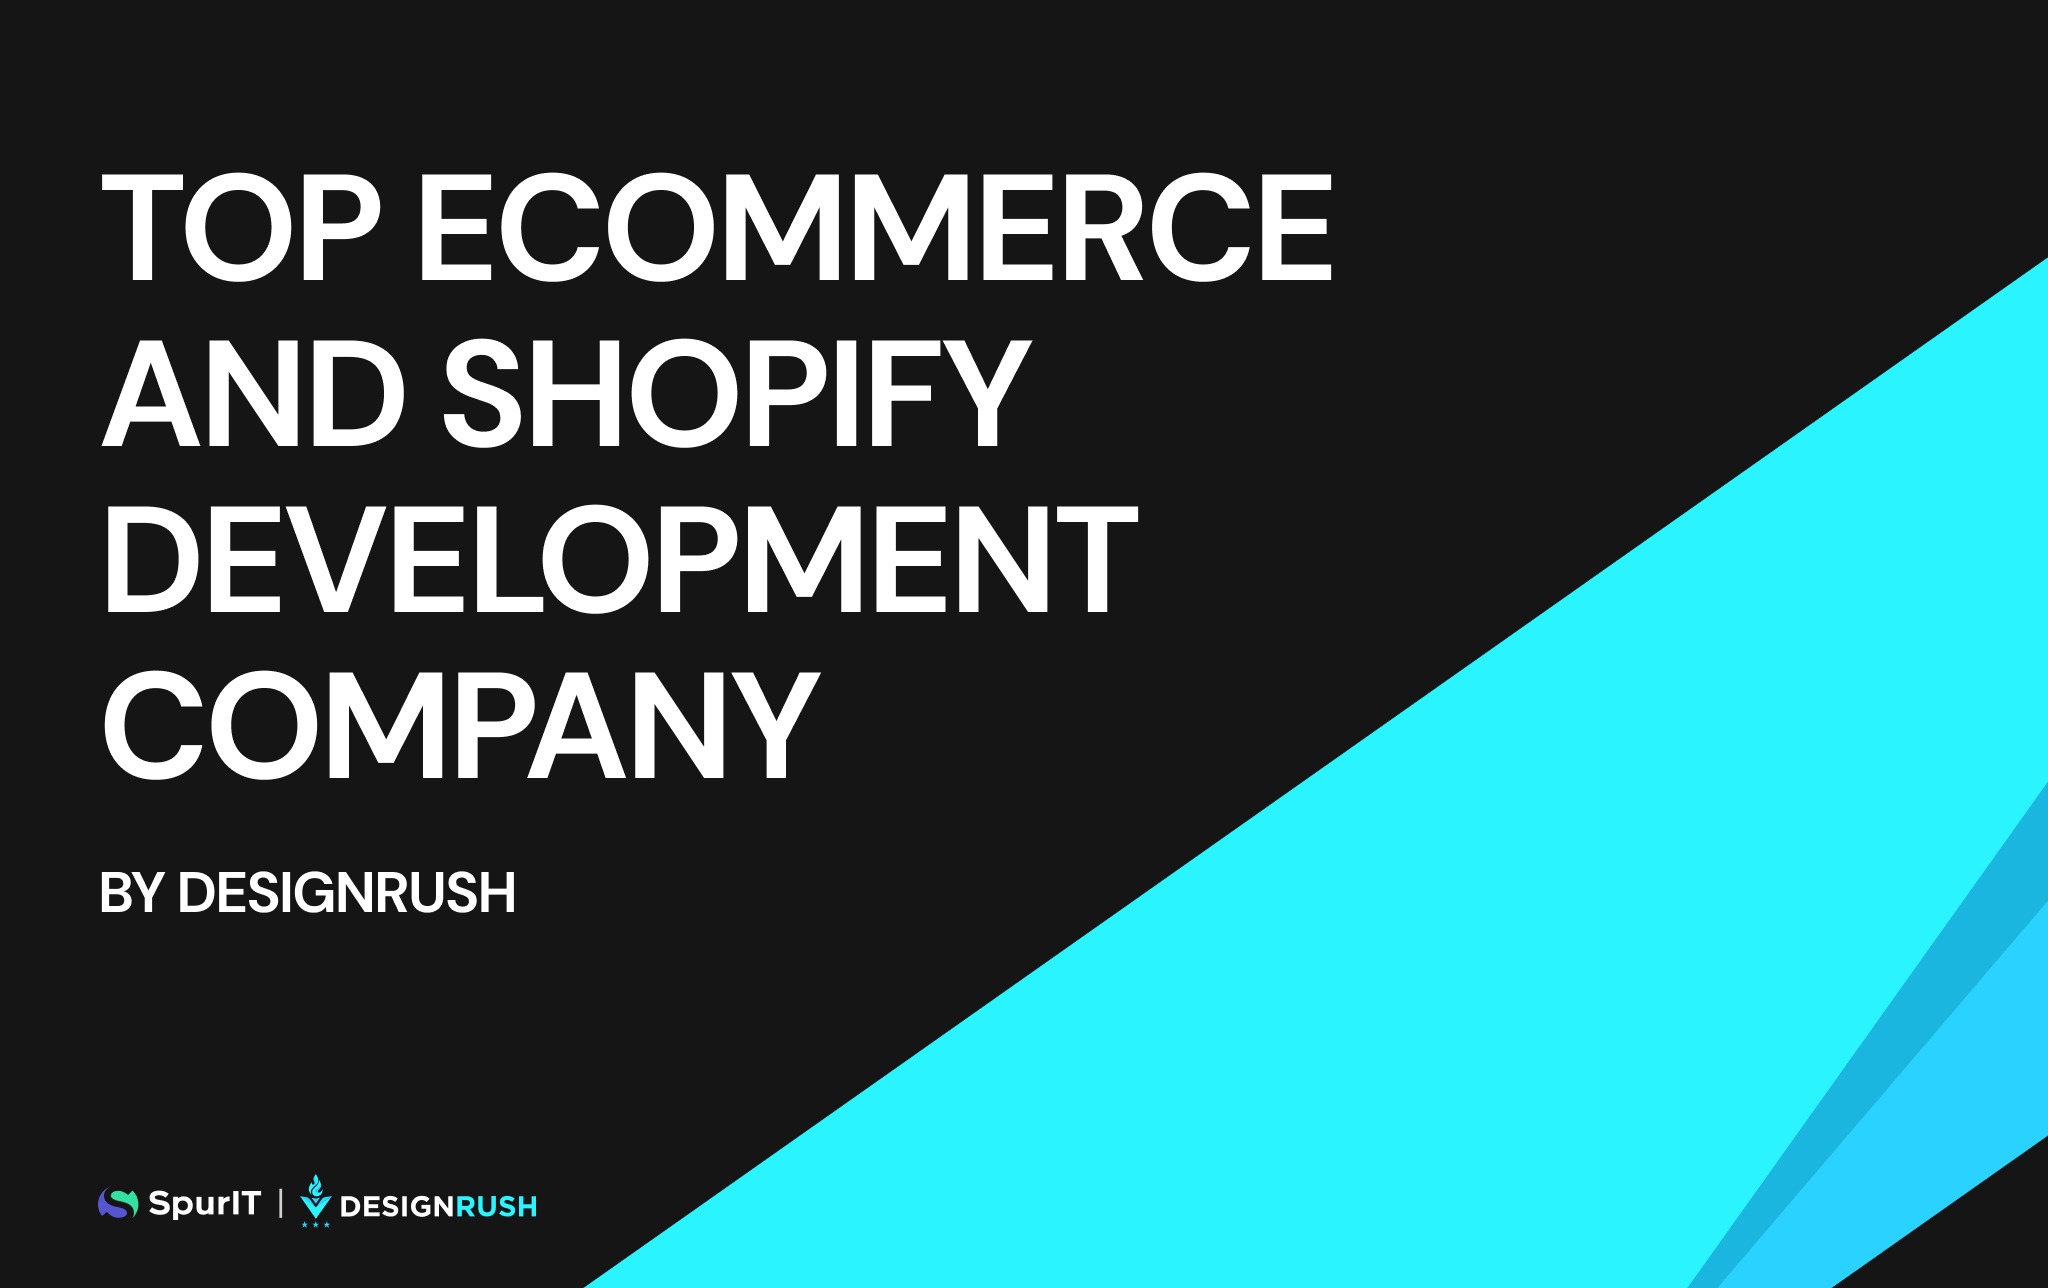 SpurIT ranks among the top eCommerce and Shopify development companies